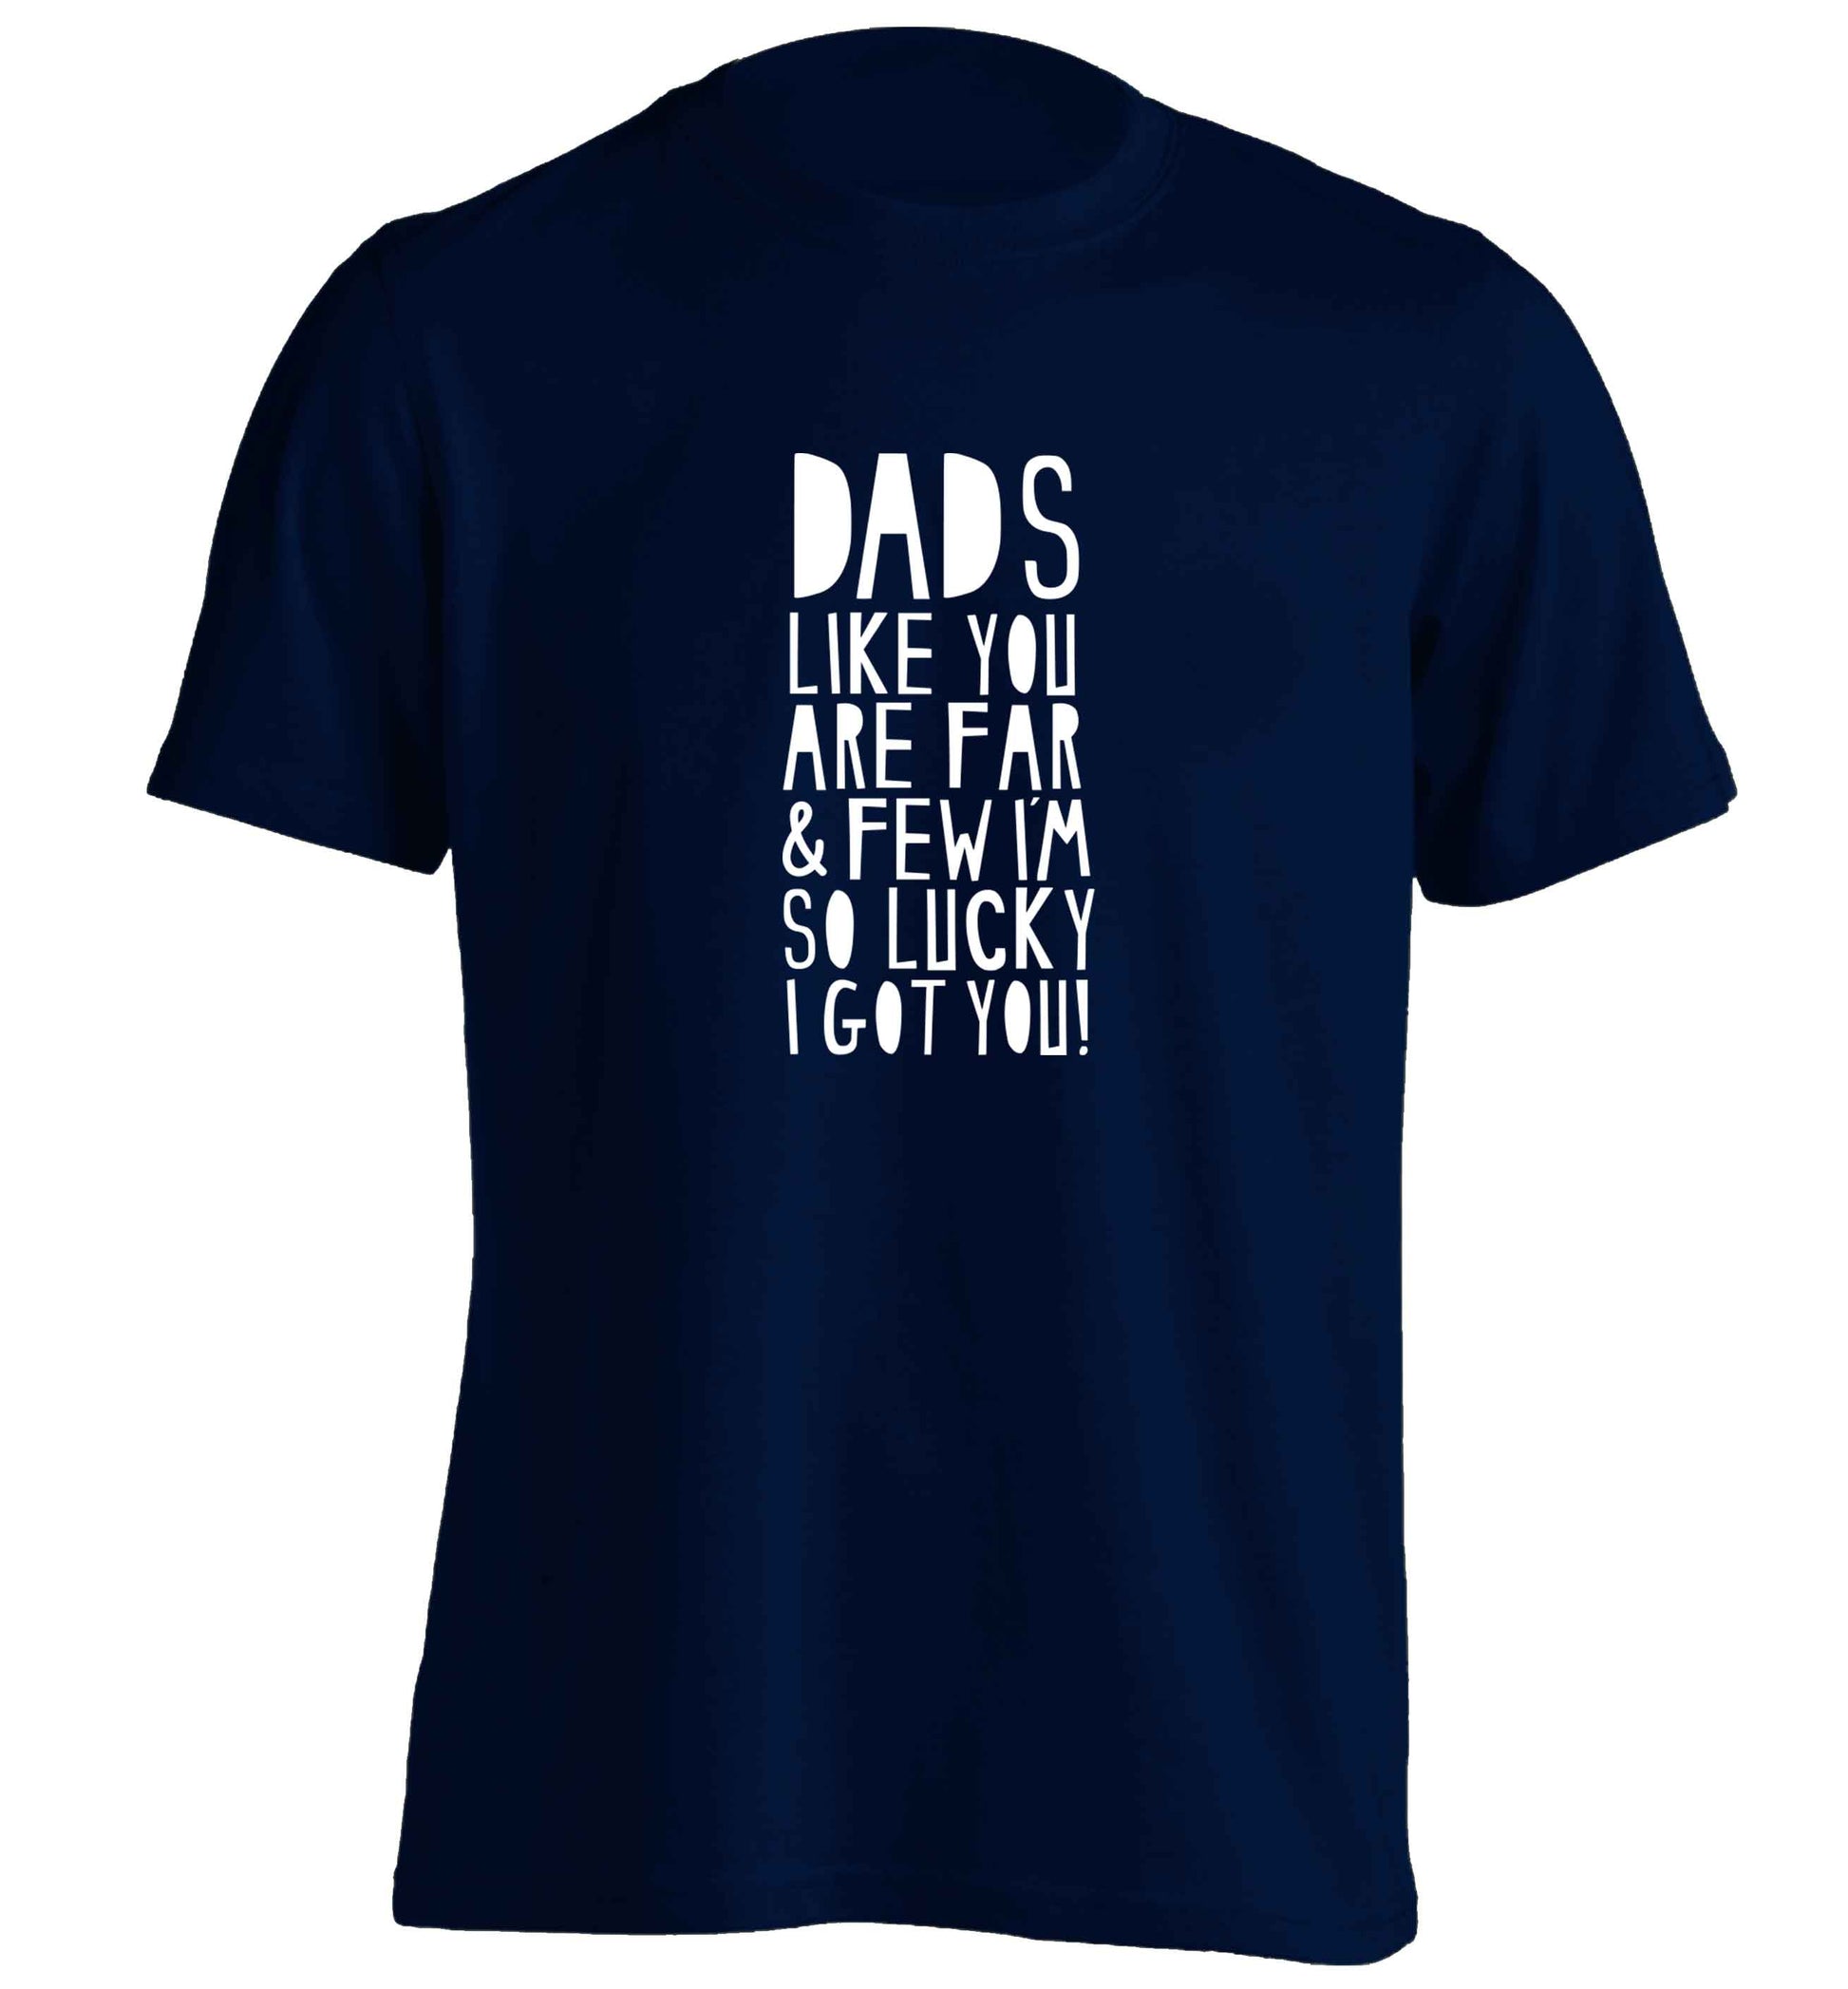 Dads like you are far and few I'm so luck I got you! adults unisex navy Tshirt 2XL